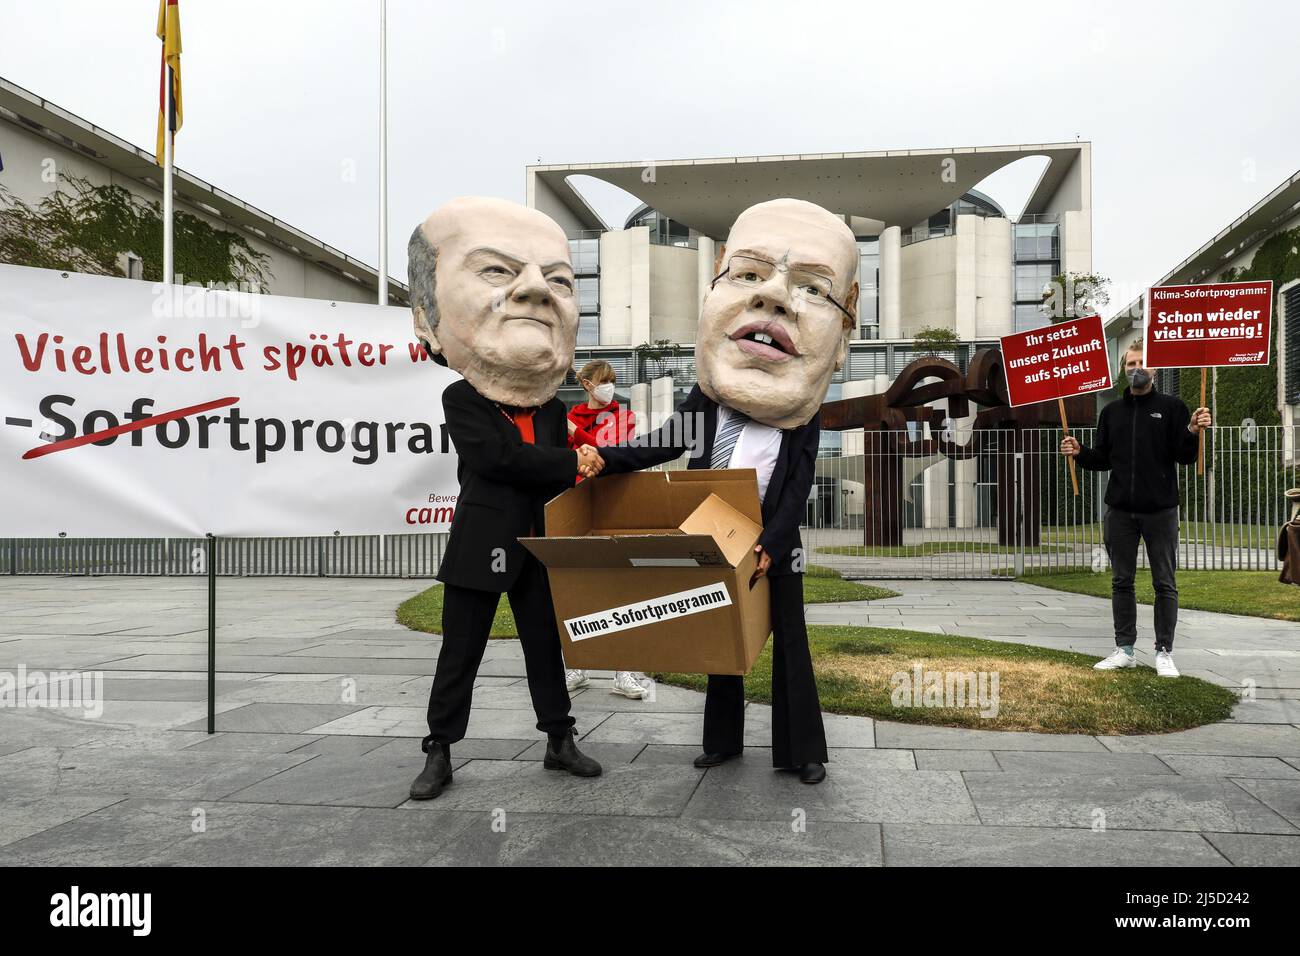 Berlin, 23.06.2021 - Activists of Campact demonstrate before cabinet meeting at the Chancellery on the new climate emergency program of CDU/CSU and SPD with masks of Federal Minister of Economics Peter Altmaier (CDU) and Federal Minister of Finance Olaf Scholz (SPD). [automated translation] Stock Photo